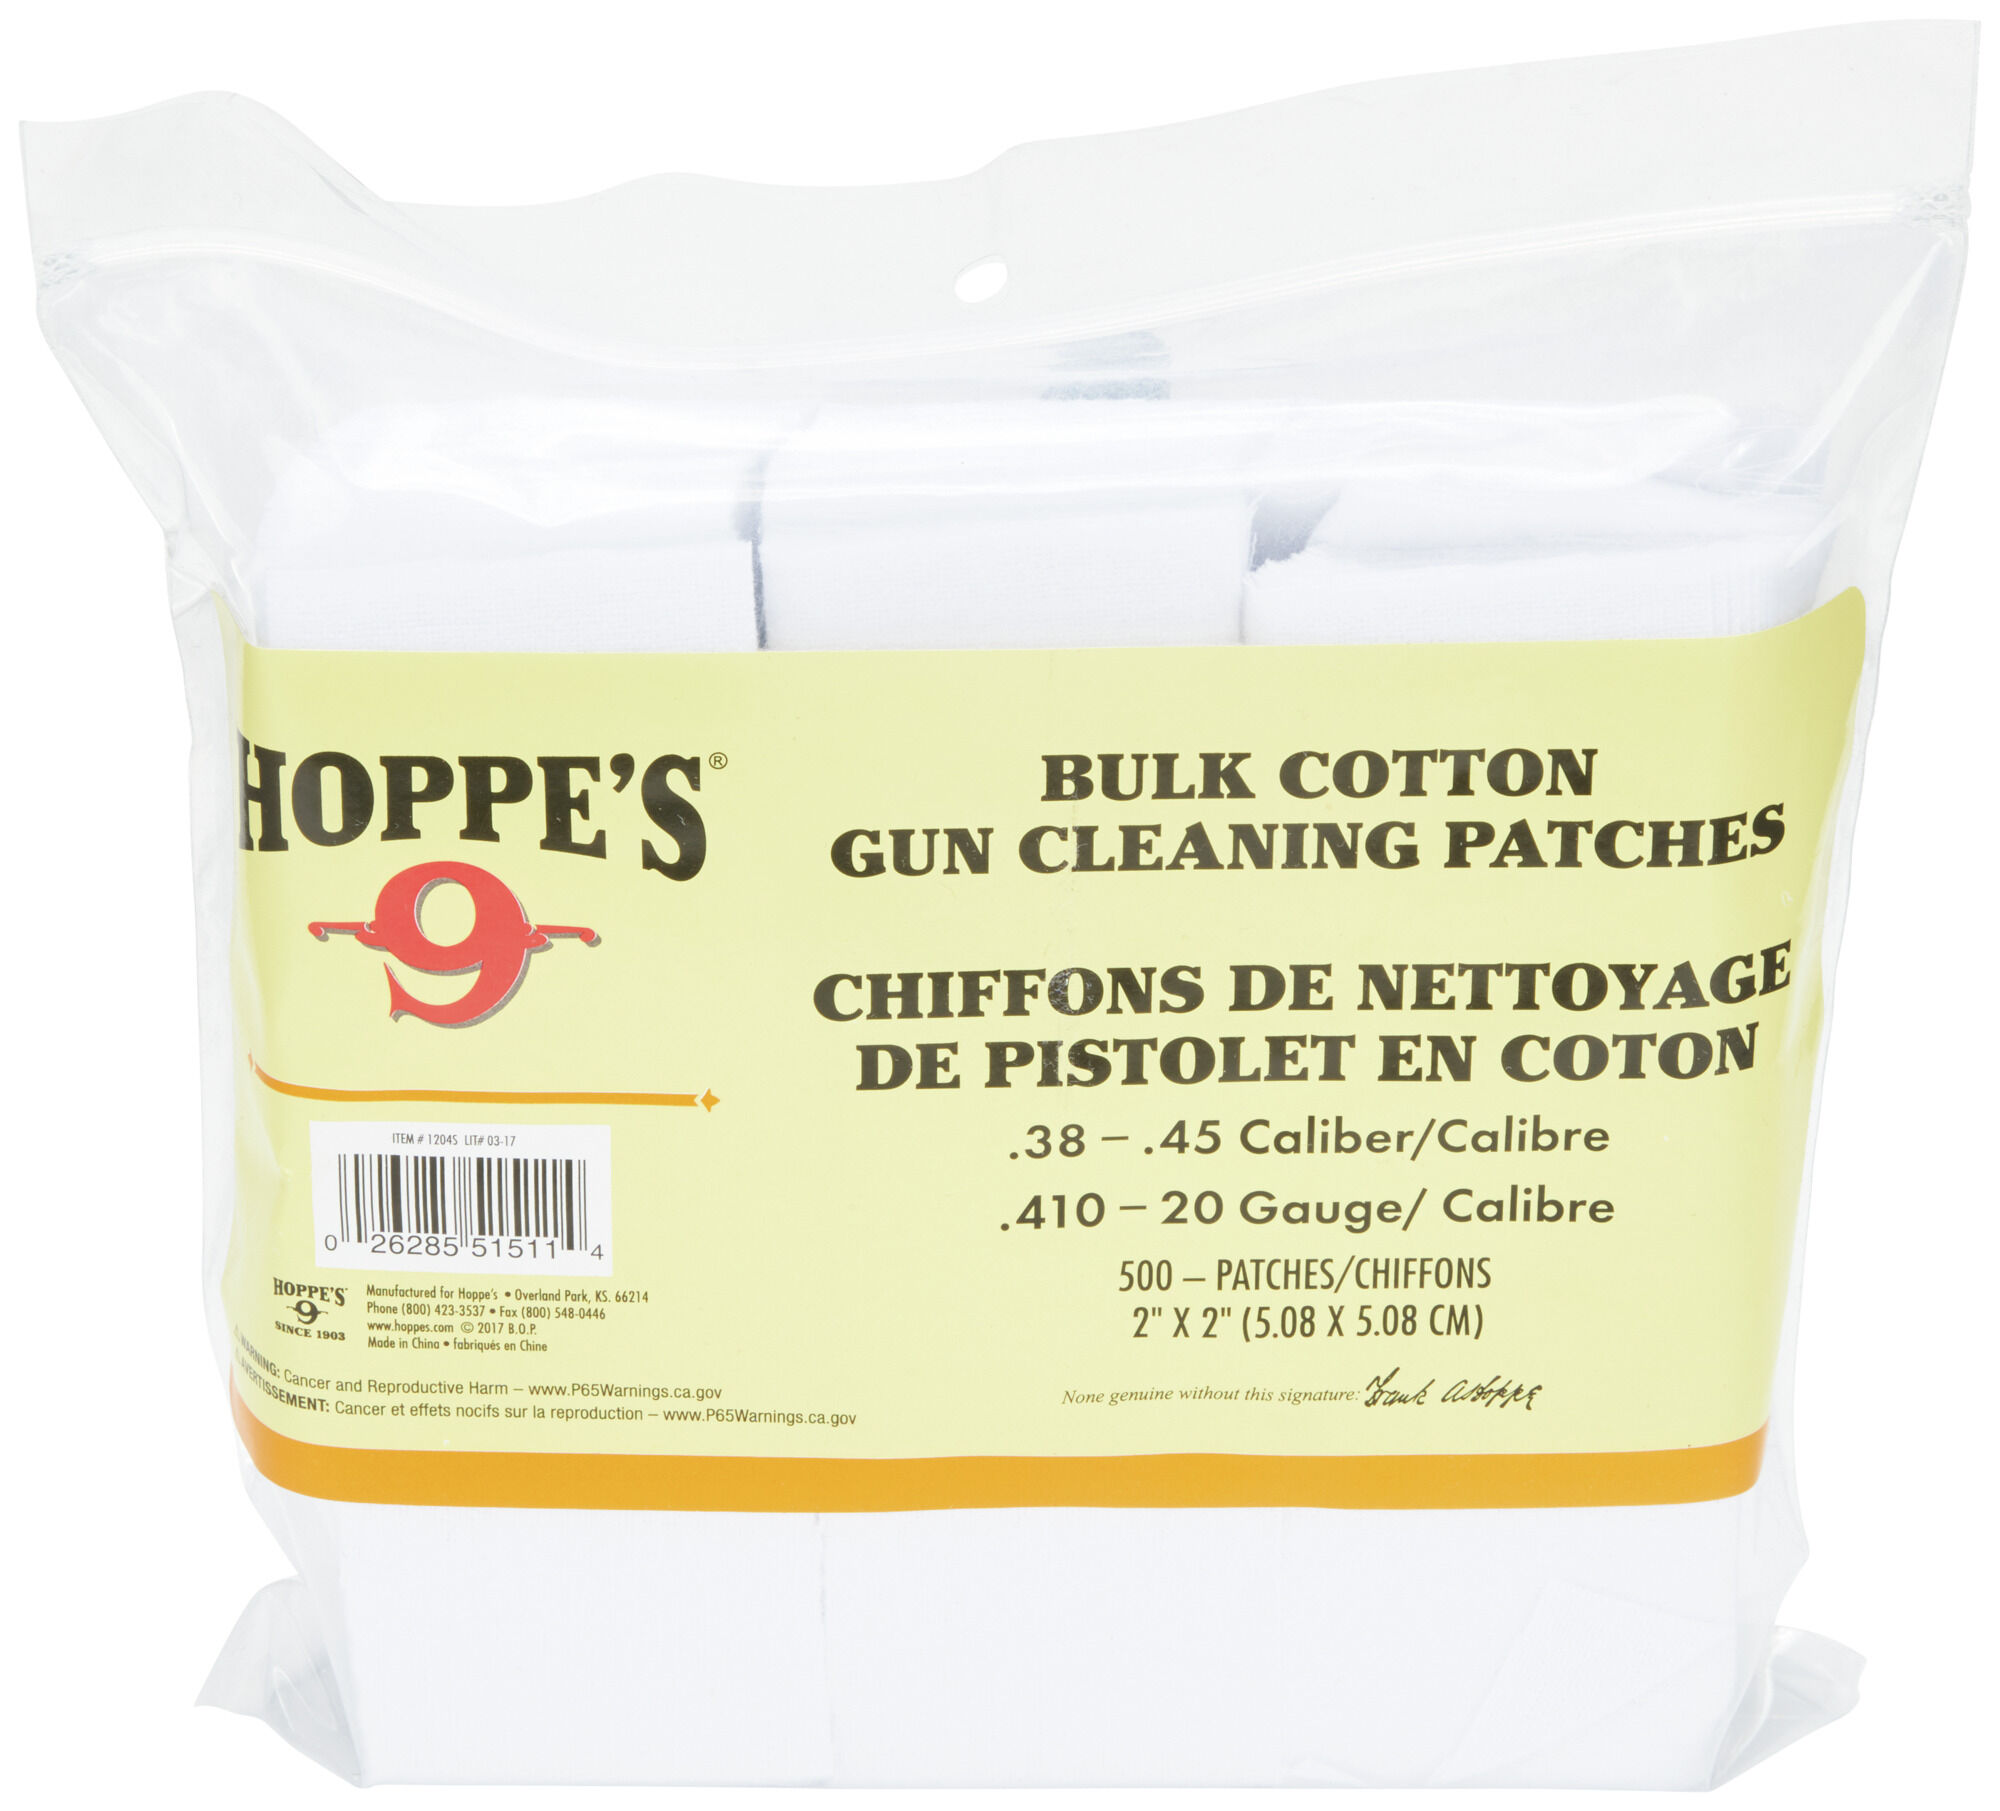 Hoppes .30 Pack Of 120 Treated Gun Cleaning Patches Bag 1199 